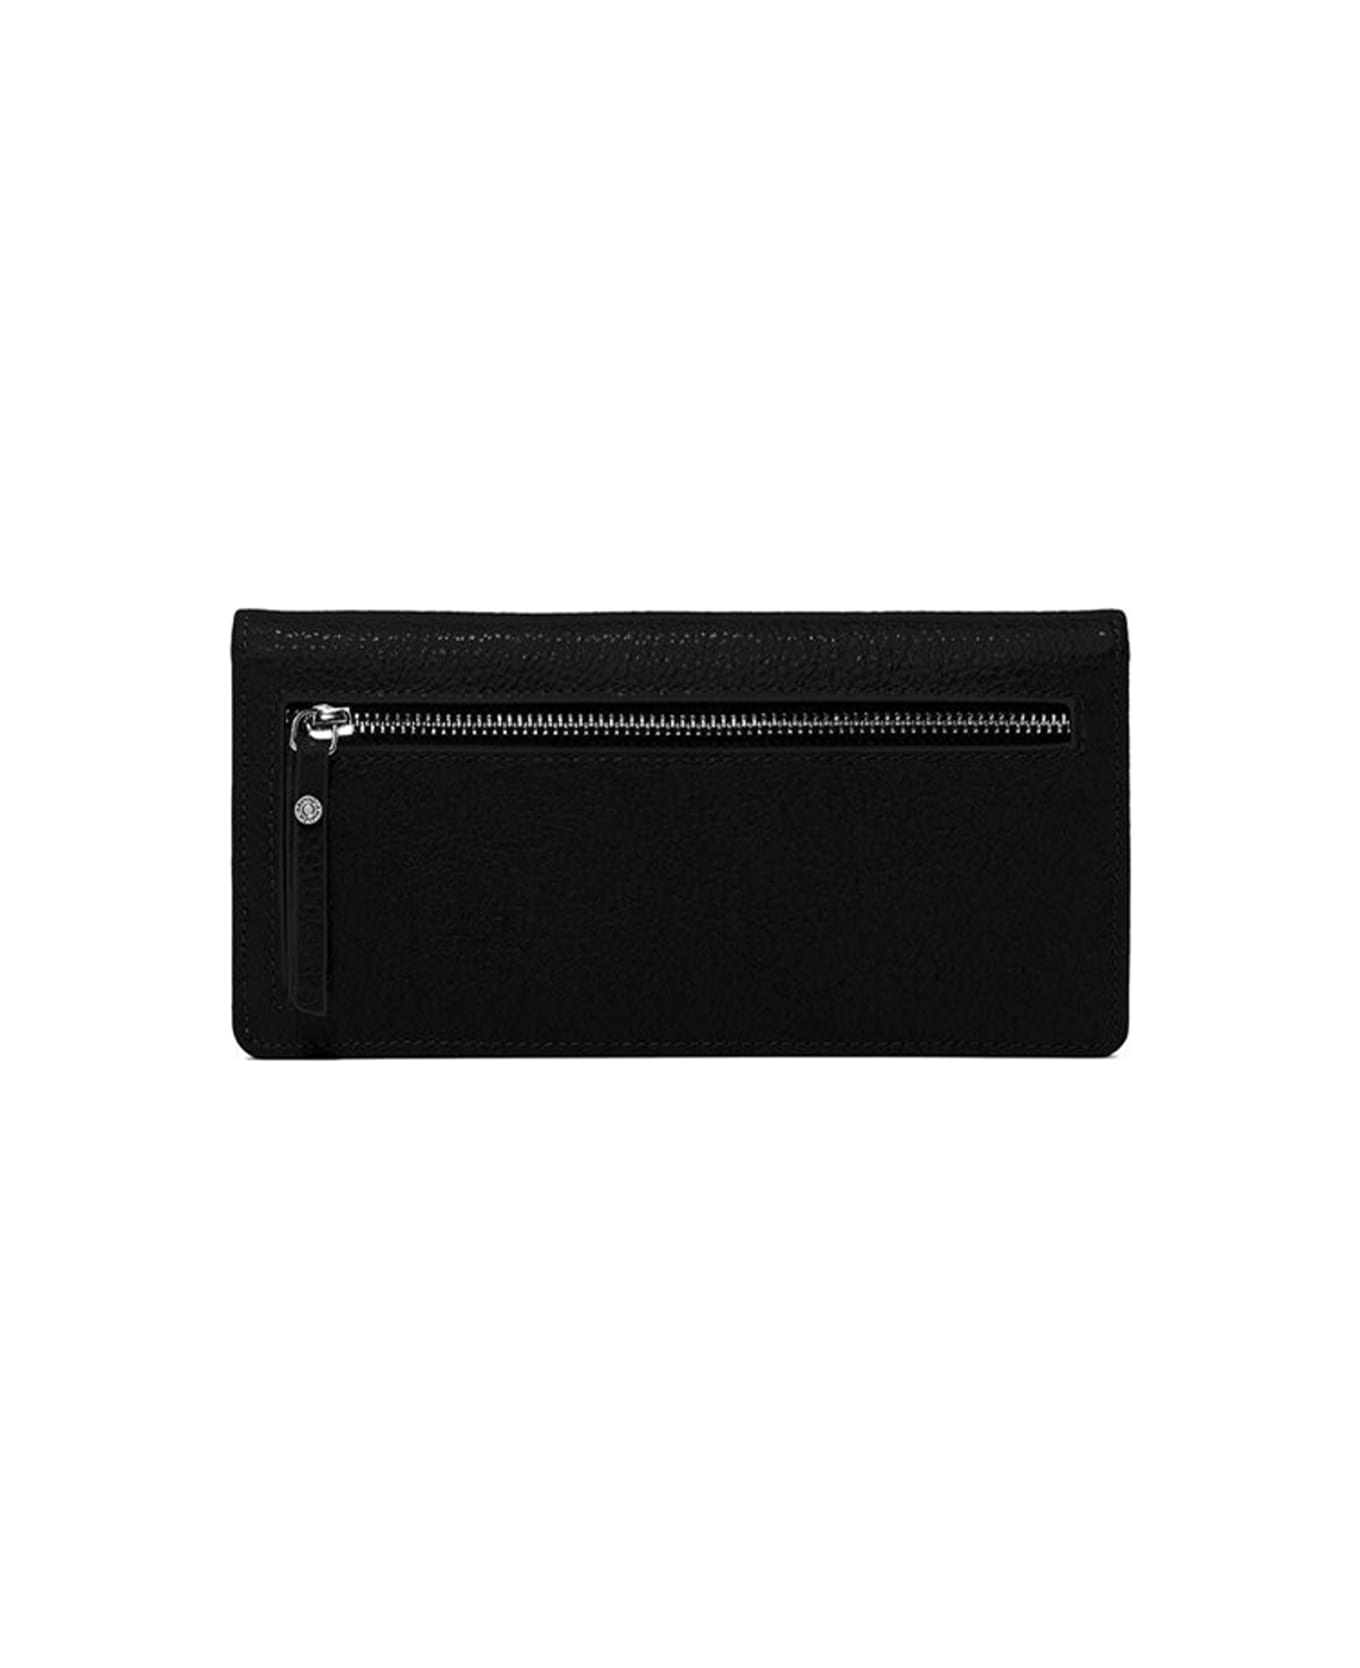 Gianni Chiarini Wallets Dollaro Wallet In Hammered Leather - NERO